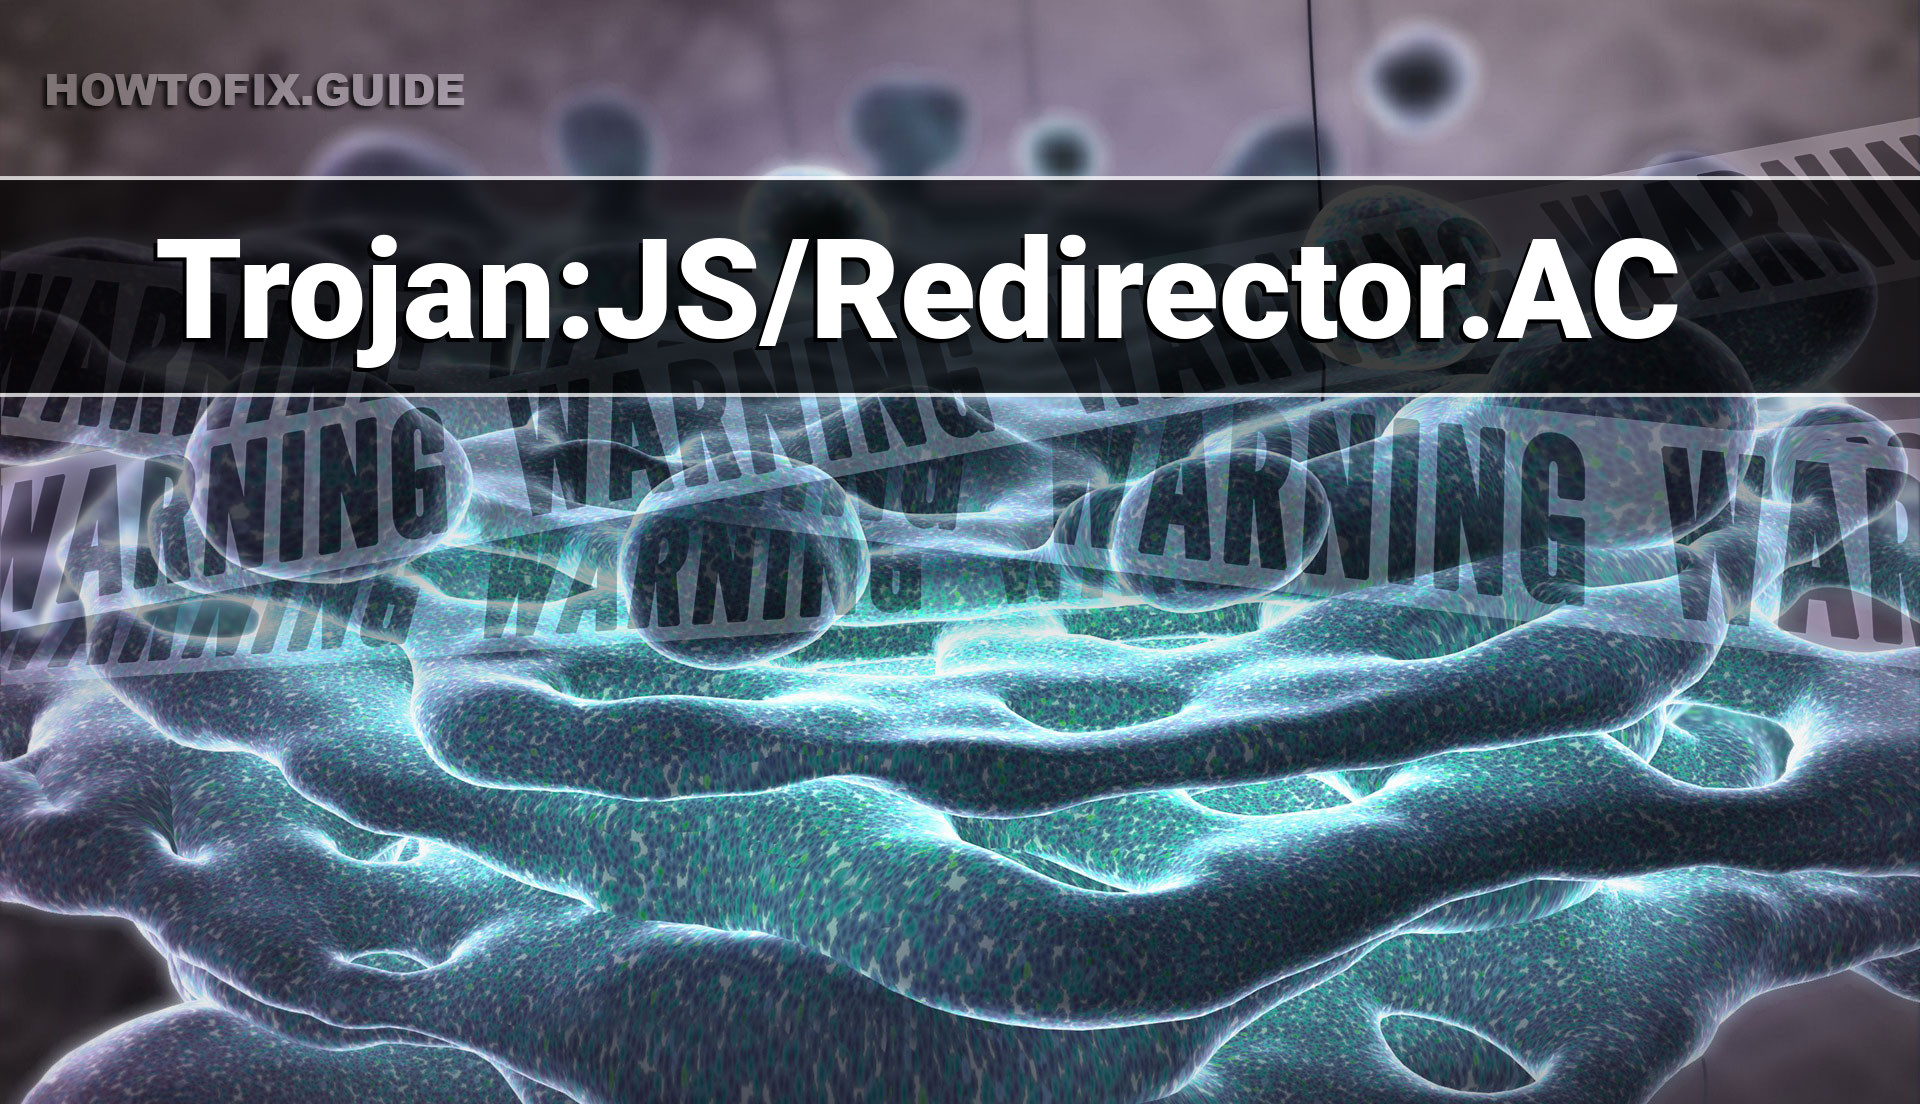 js redirector removal tool